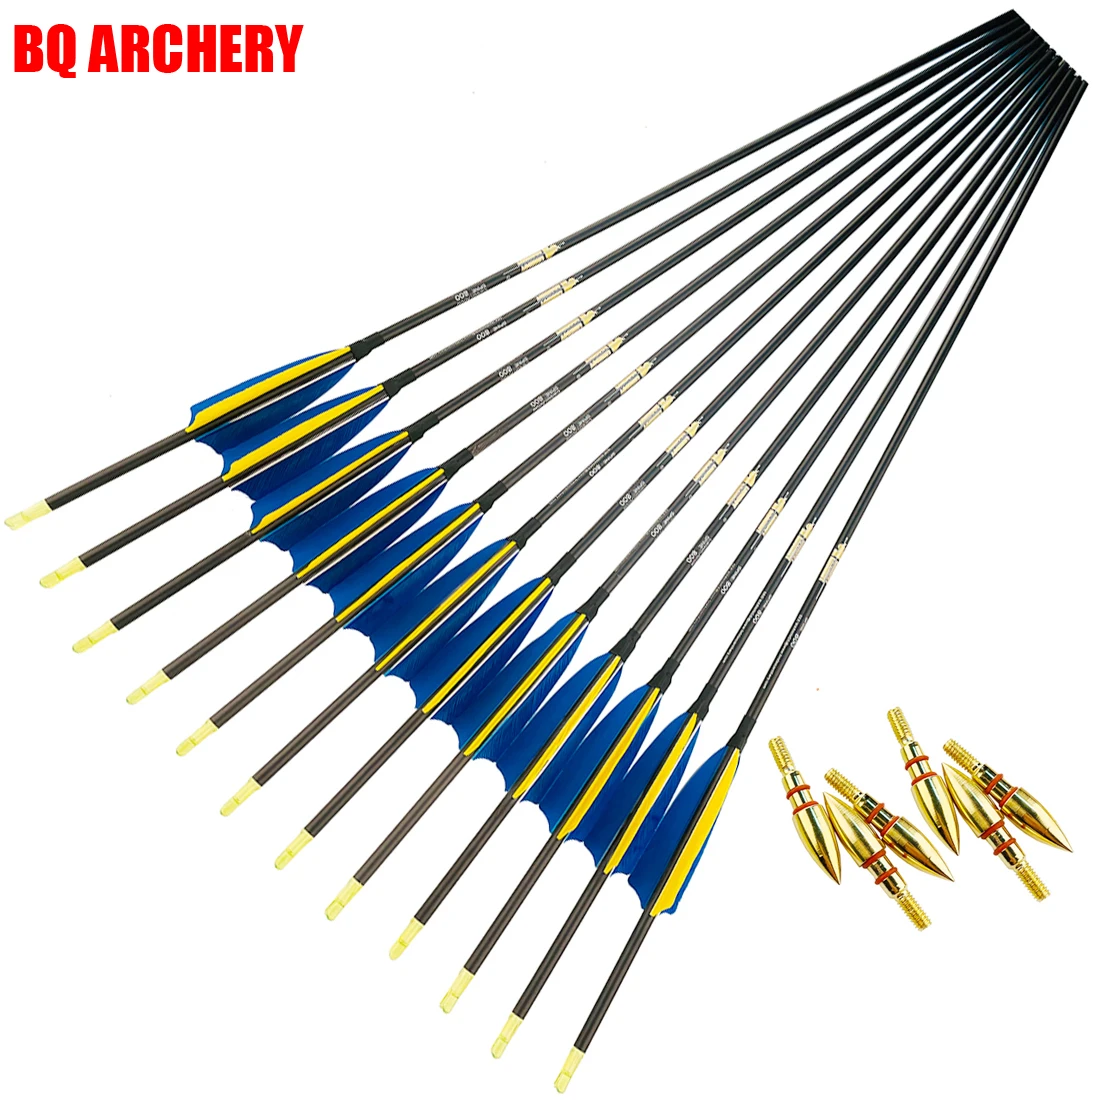 Arrows Horseback Fast Shooting Archery Nock Arrows Pure Carbon ID6.2mm Spine300-800 Compound Bow Shooting 12PCS